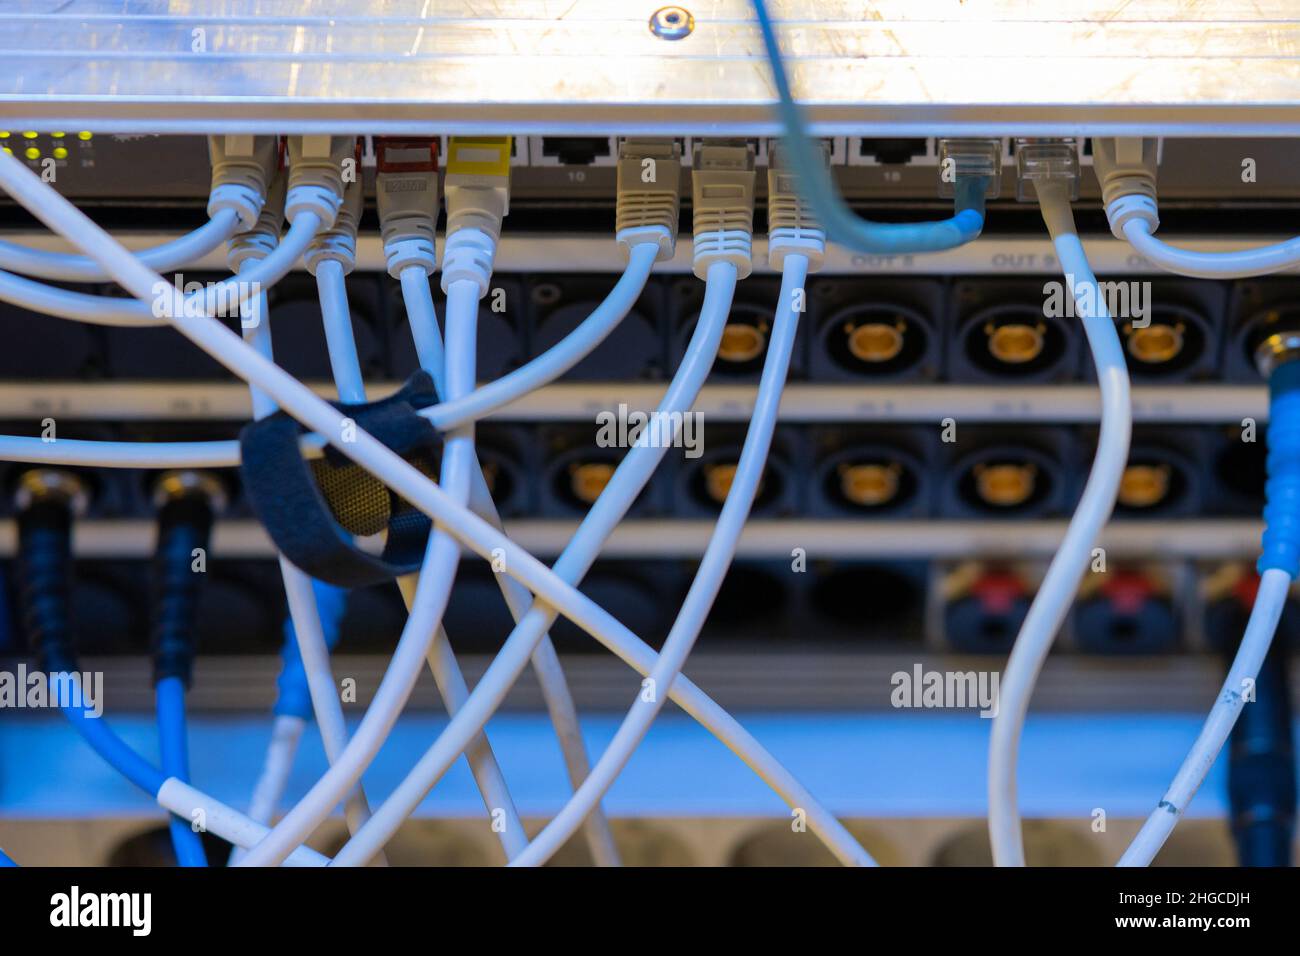 Internet utp or network cables plugged in a router or switch at a tv production engine or box. Back view of a switch panel for live tv production. Stock Photo